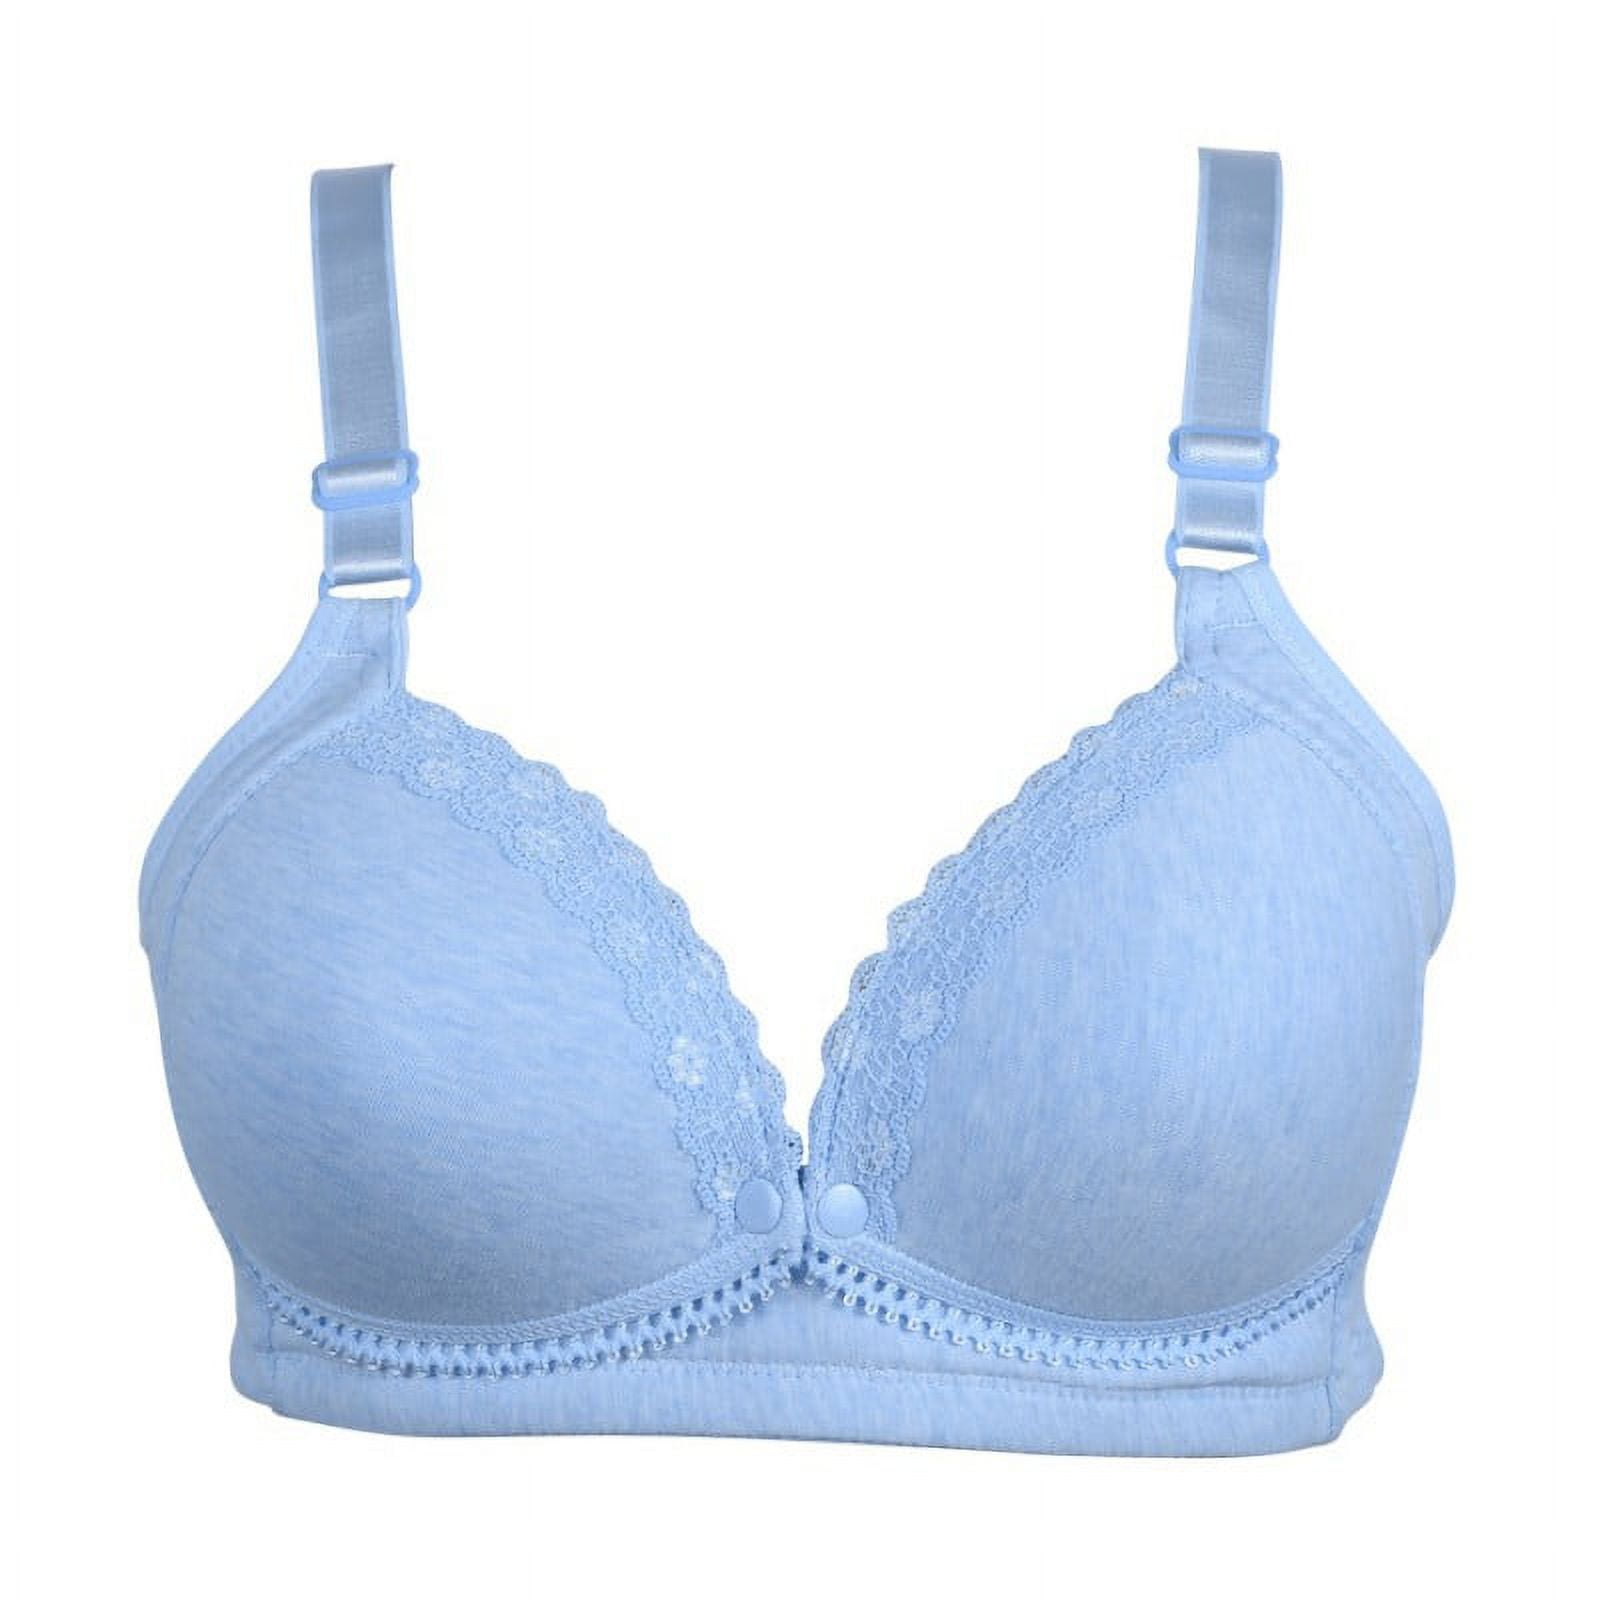 Cotton Maternity Nursing Bra Set For Breastfeeding And Pregnancy  Comfortable Bra Underwear For Pregnant Women With Lactancia Support From  Wai07, $16.09